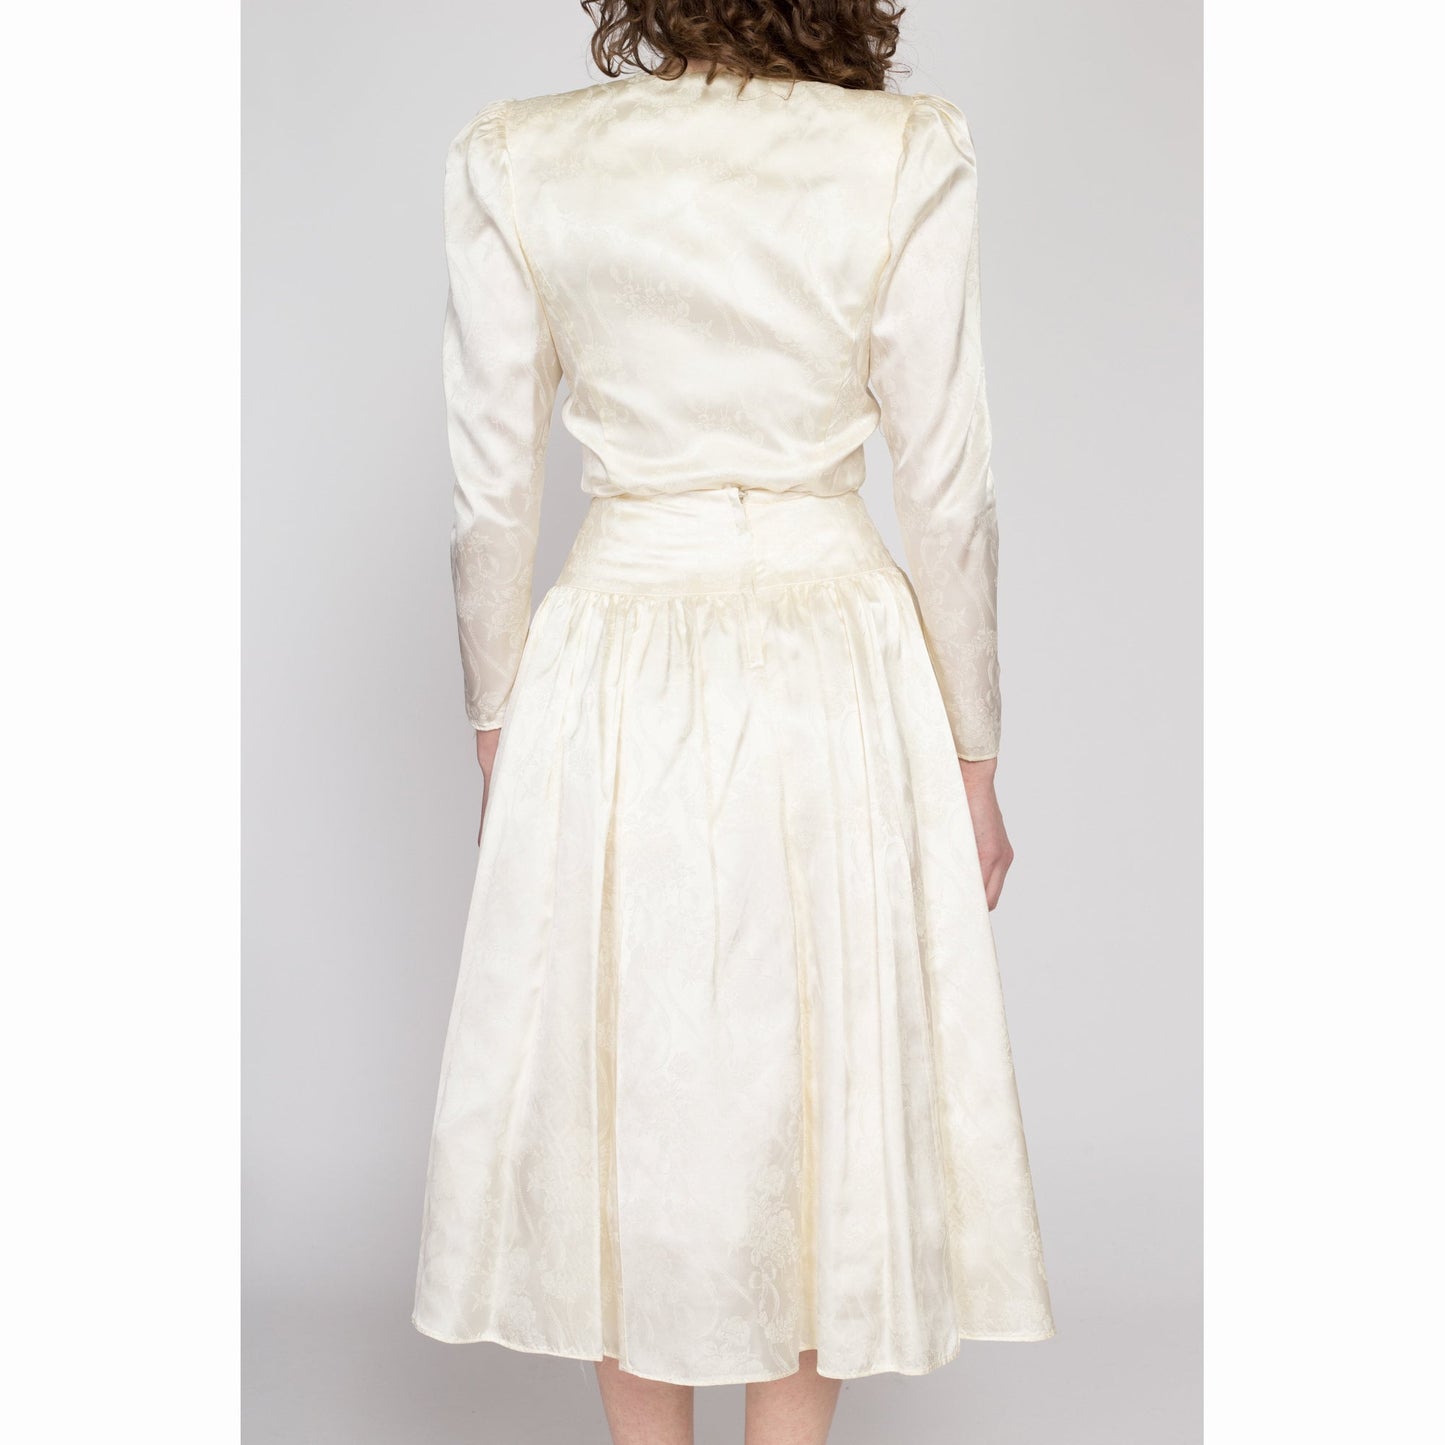 Small 80s Jessica McClintock Victorian Ivory Satin Skirt Suit | Vintage Button Up Jacket & High Waisted Midi Skirt Two Piece Bridal Outfit